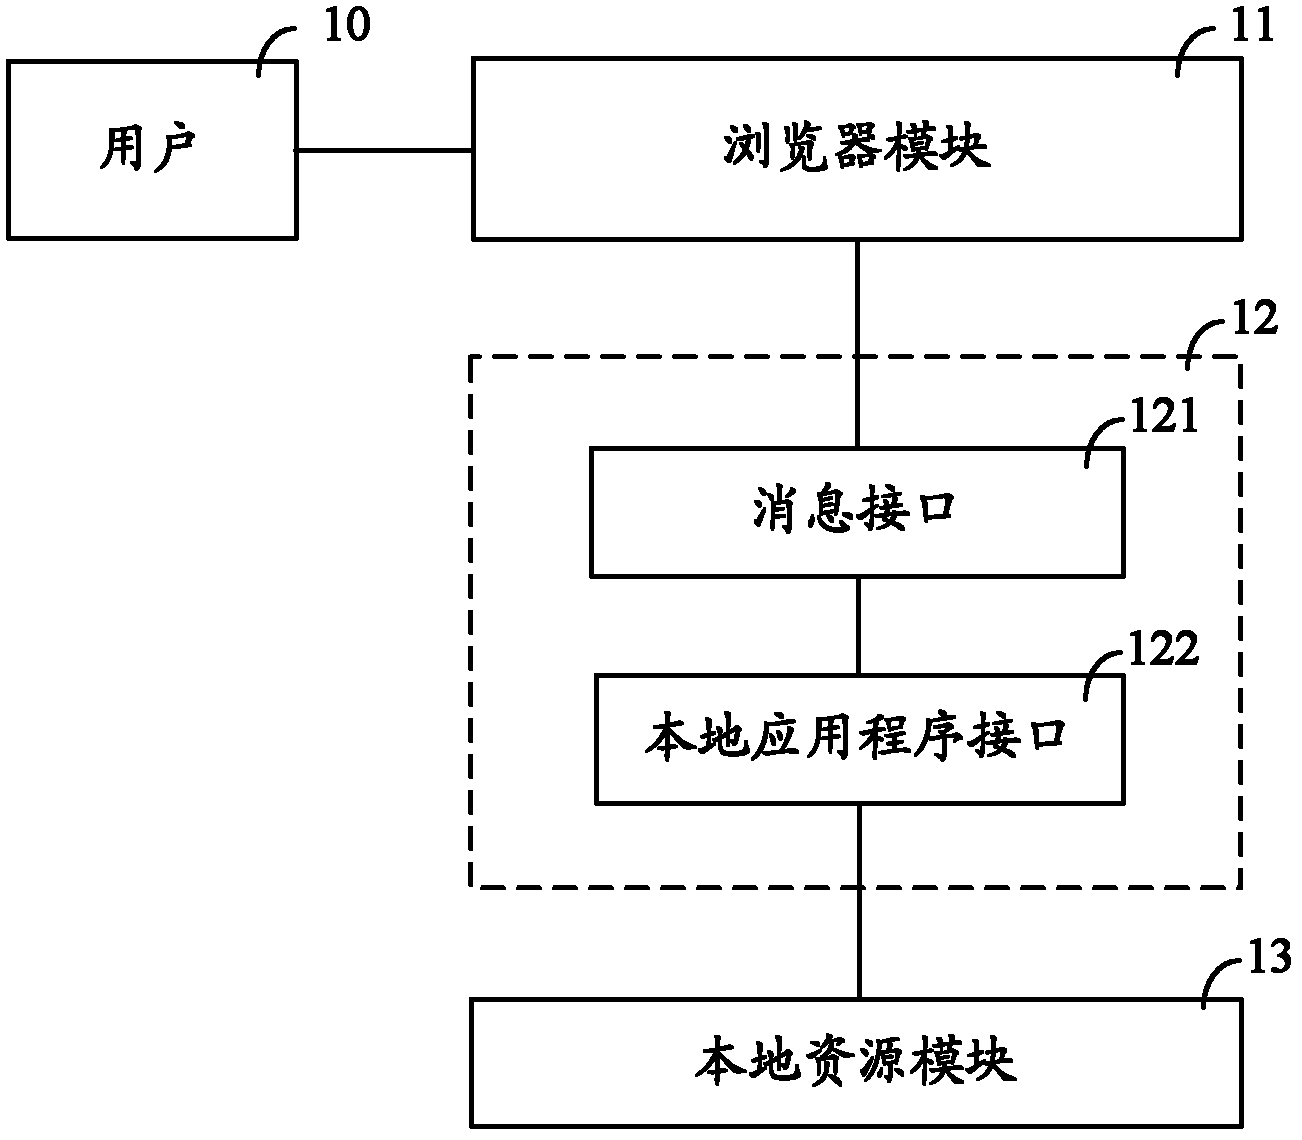 Embedded browser application extension system and method